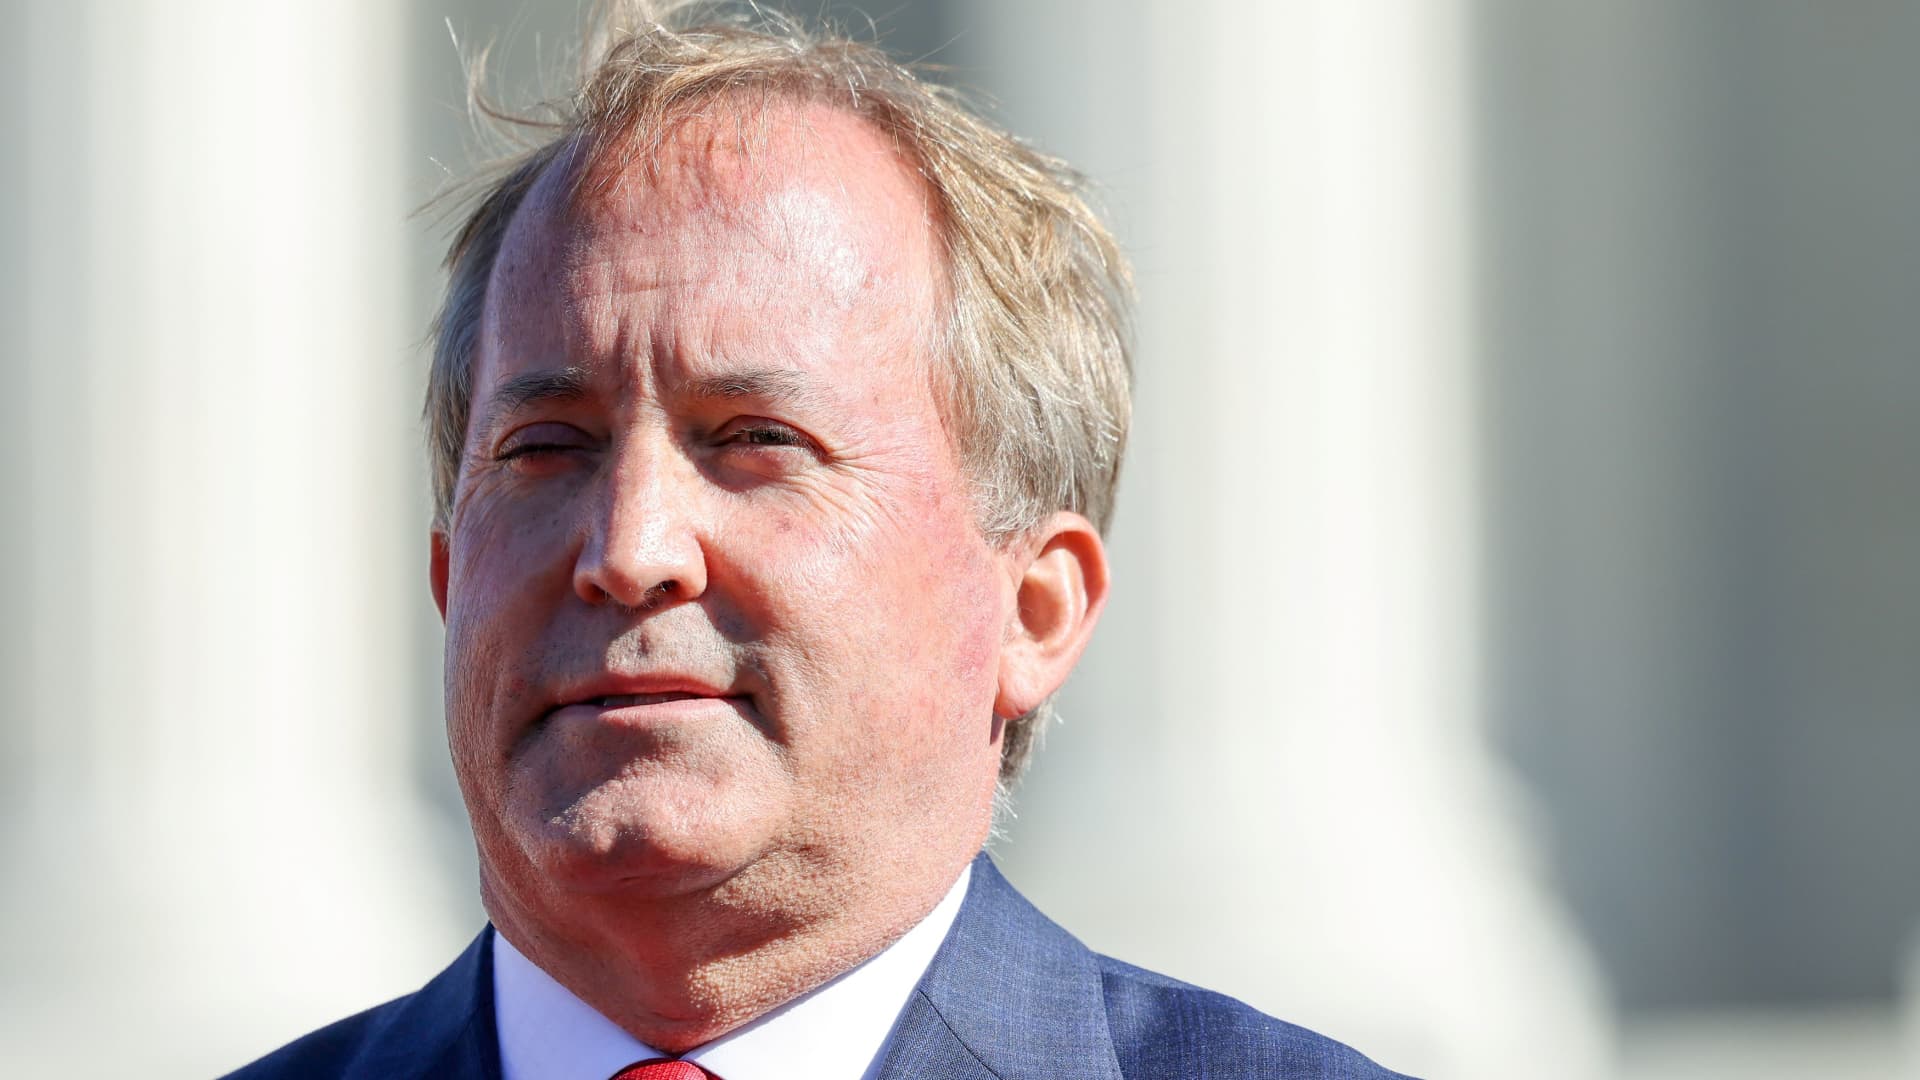 Texas AG Ken Paxton fled home with his wife to avoid subpoena in abortion case, court filing says